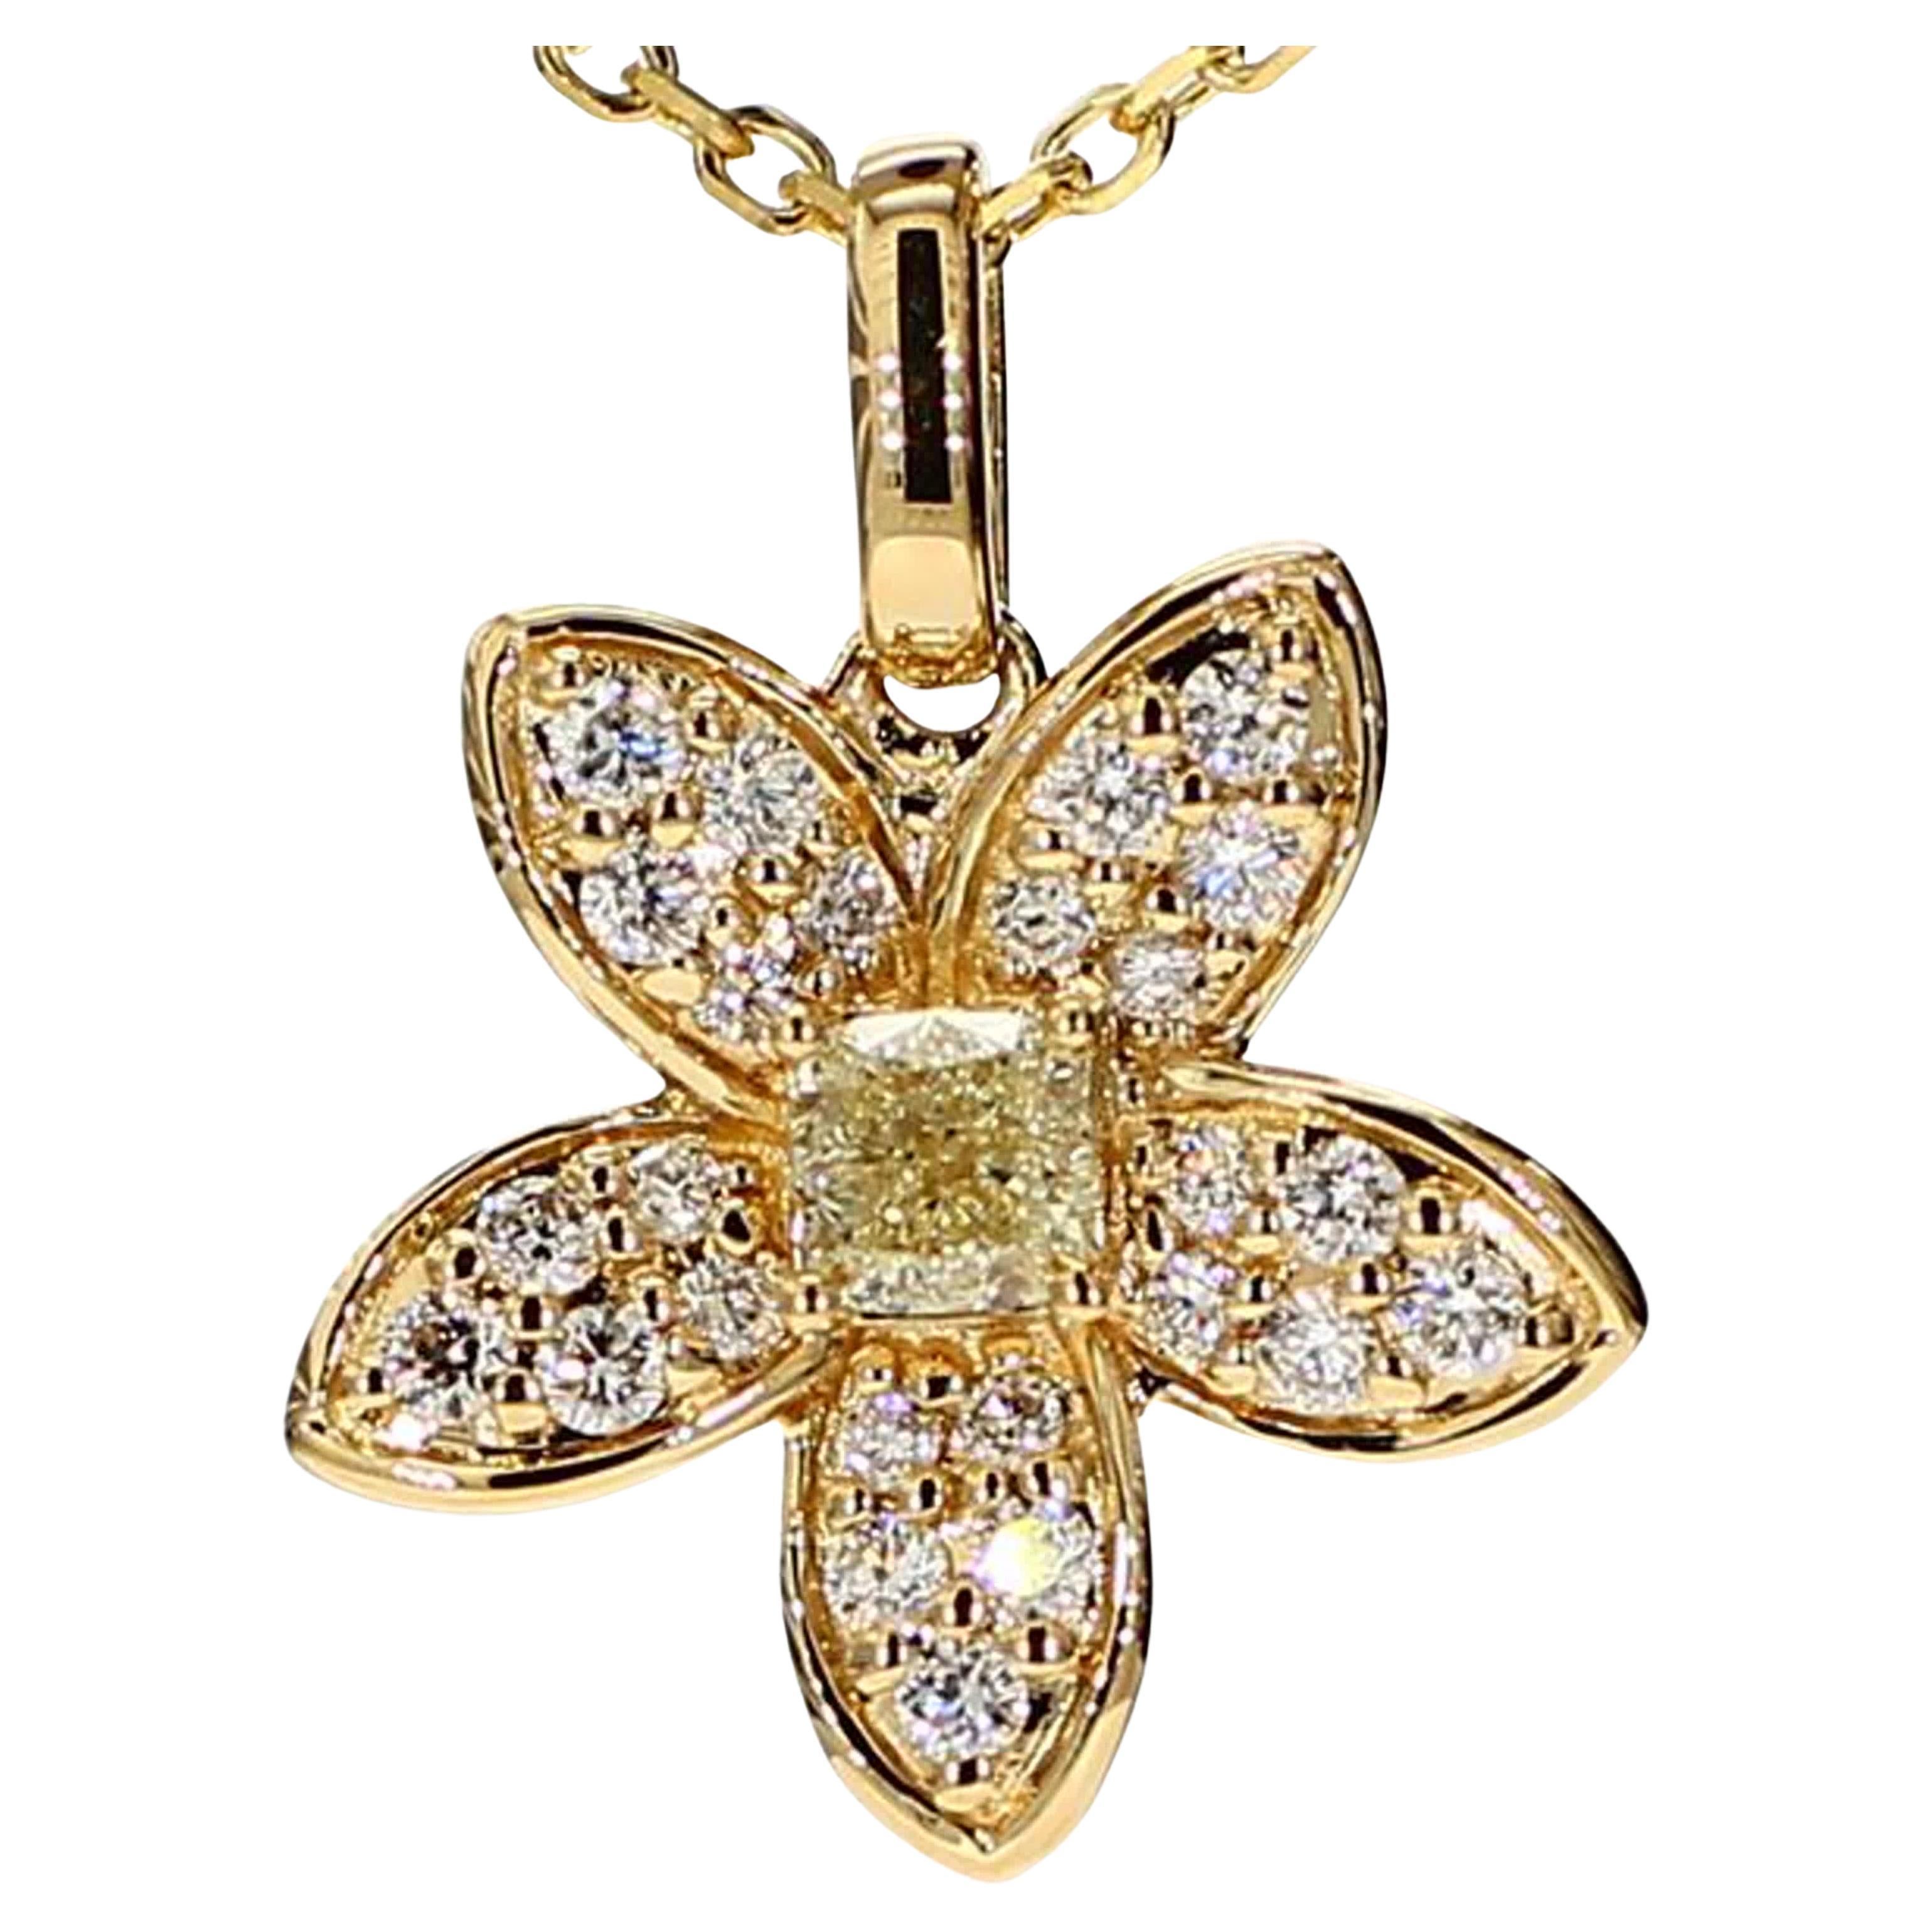 RareGemWorld's intriguing diamond pendant. Mounted in a beautiful 18K Yellow Gold setting with a natural cushion cut yellow diamond. The yellow diamond is surrounded by small round natural white diamond melee in a beautiful flower shape. This